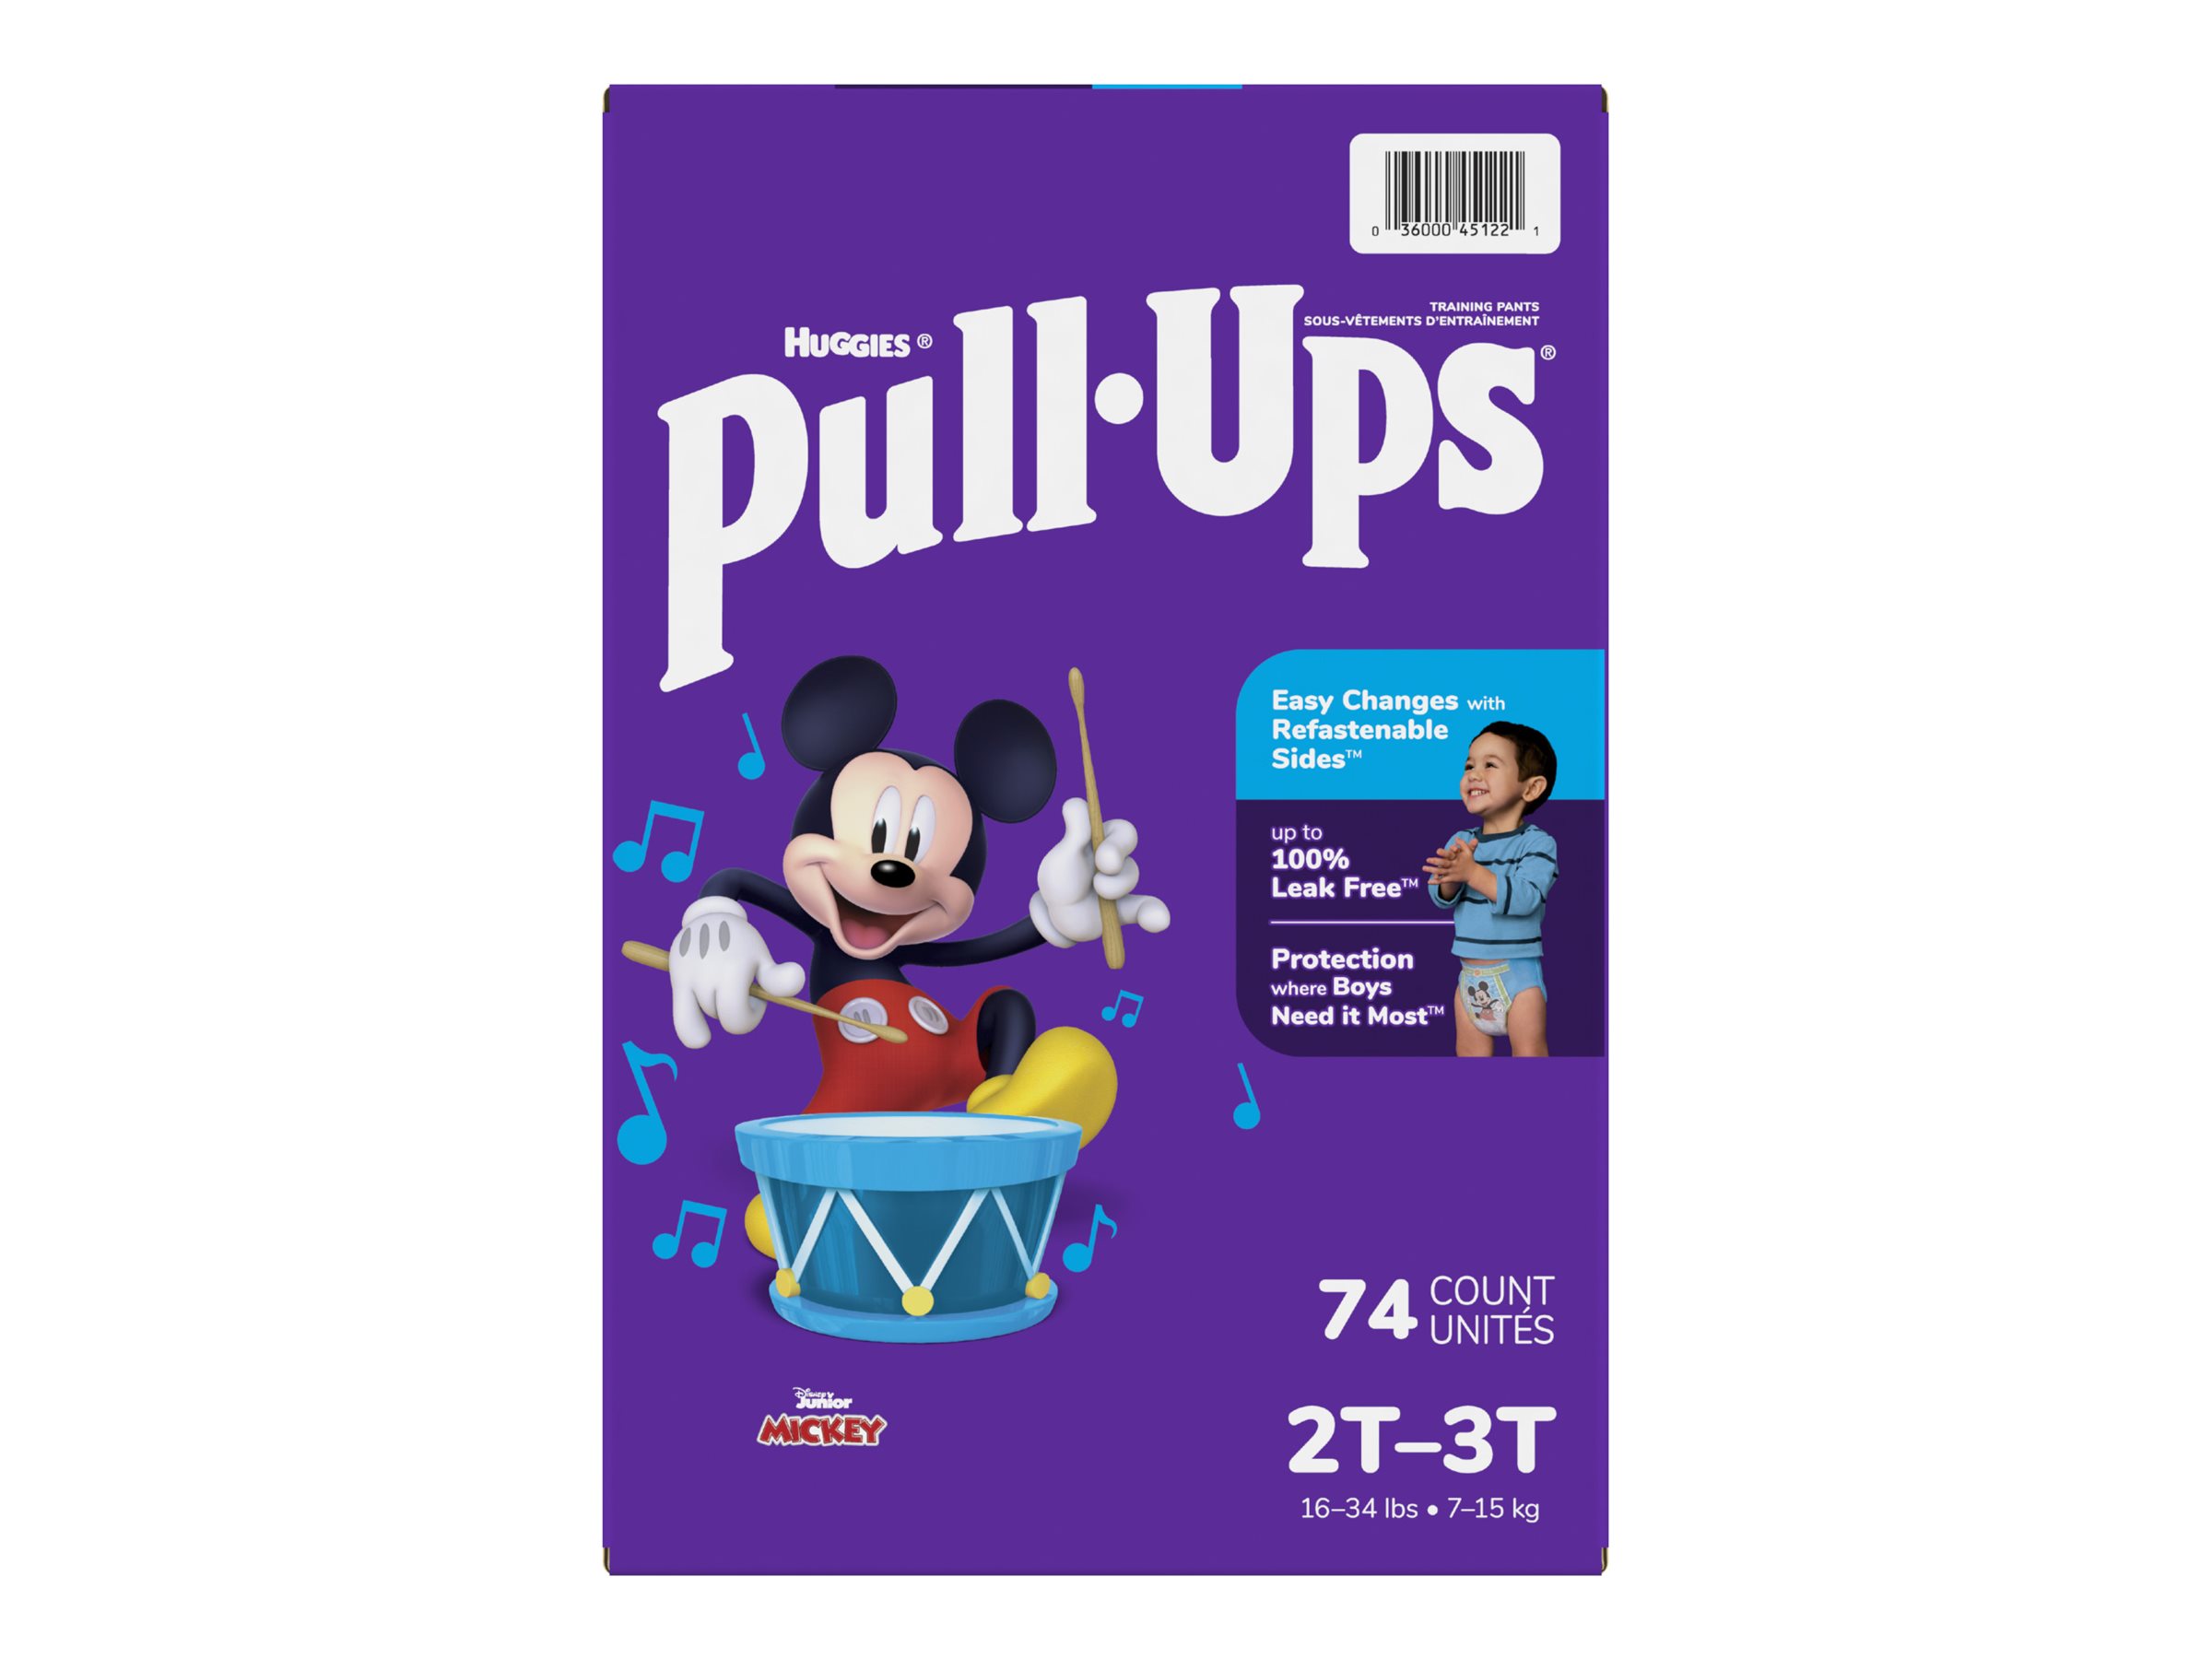 Pull-Ups® - Get Pull-Ups® training pants for your child's potty